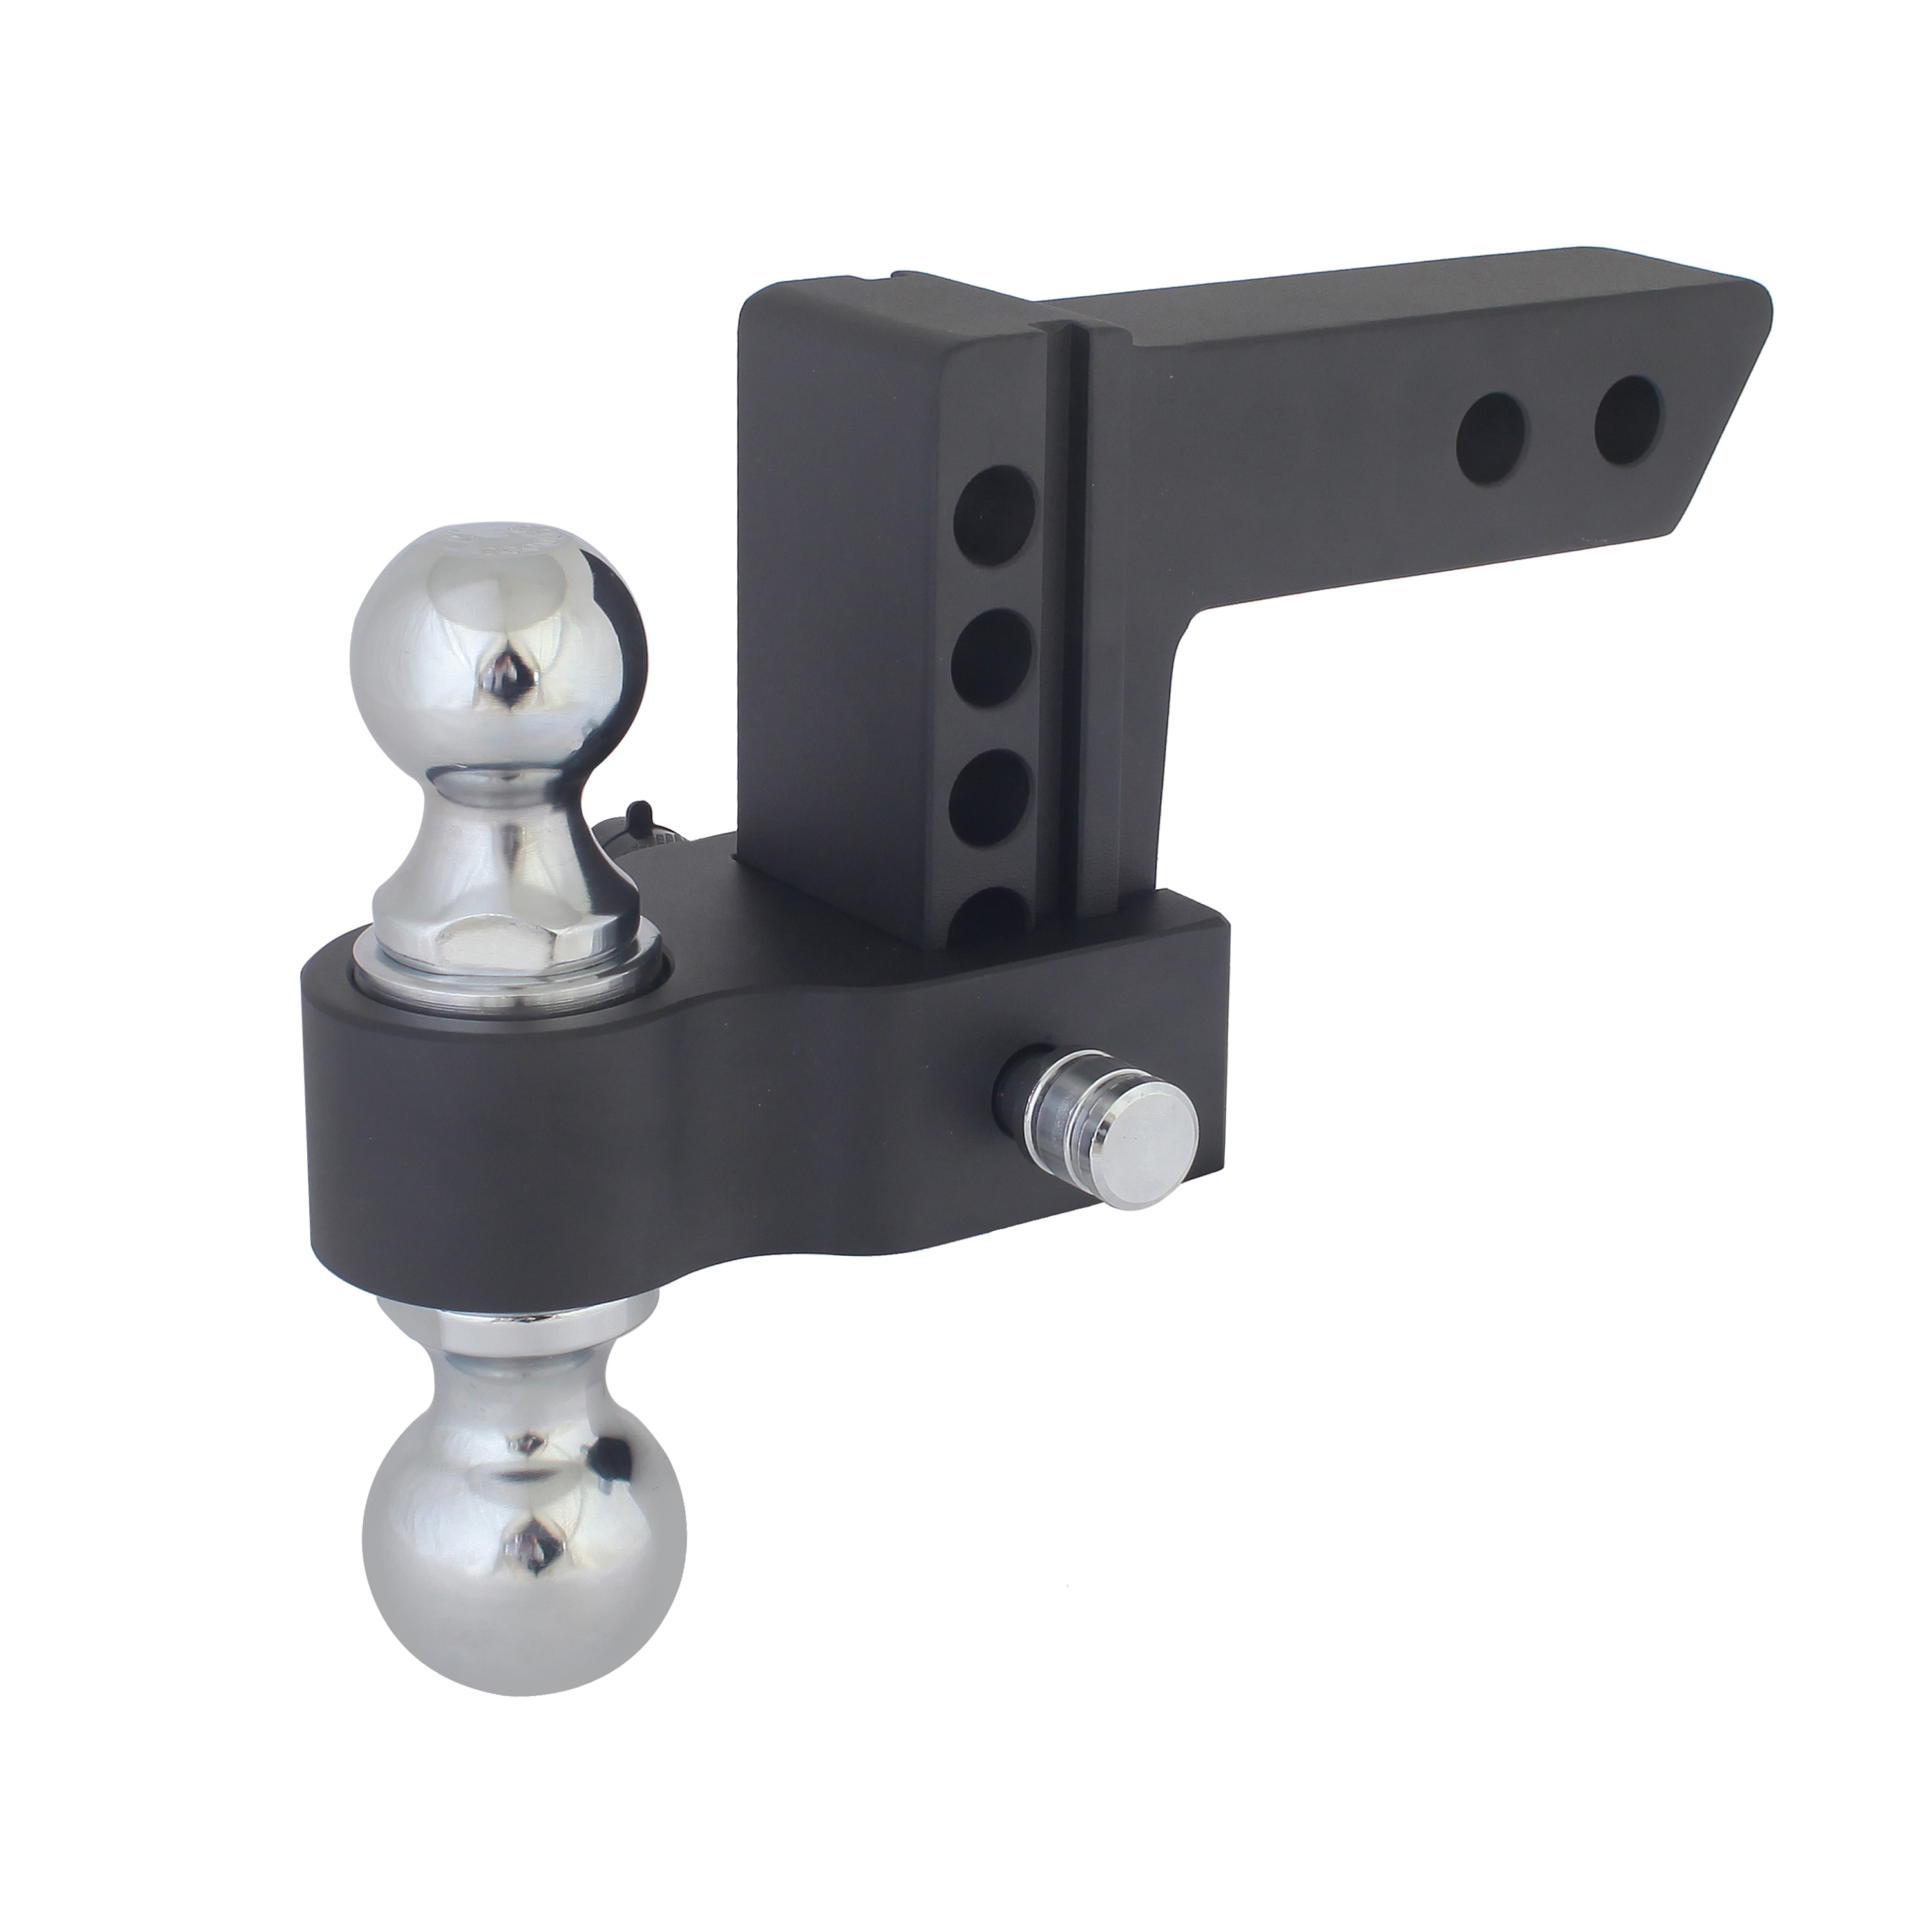 10" Adjustable Drop Hitch Mount Chrome  for 2" Receiver with 2-5/16" hitch ball 